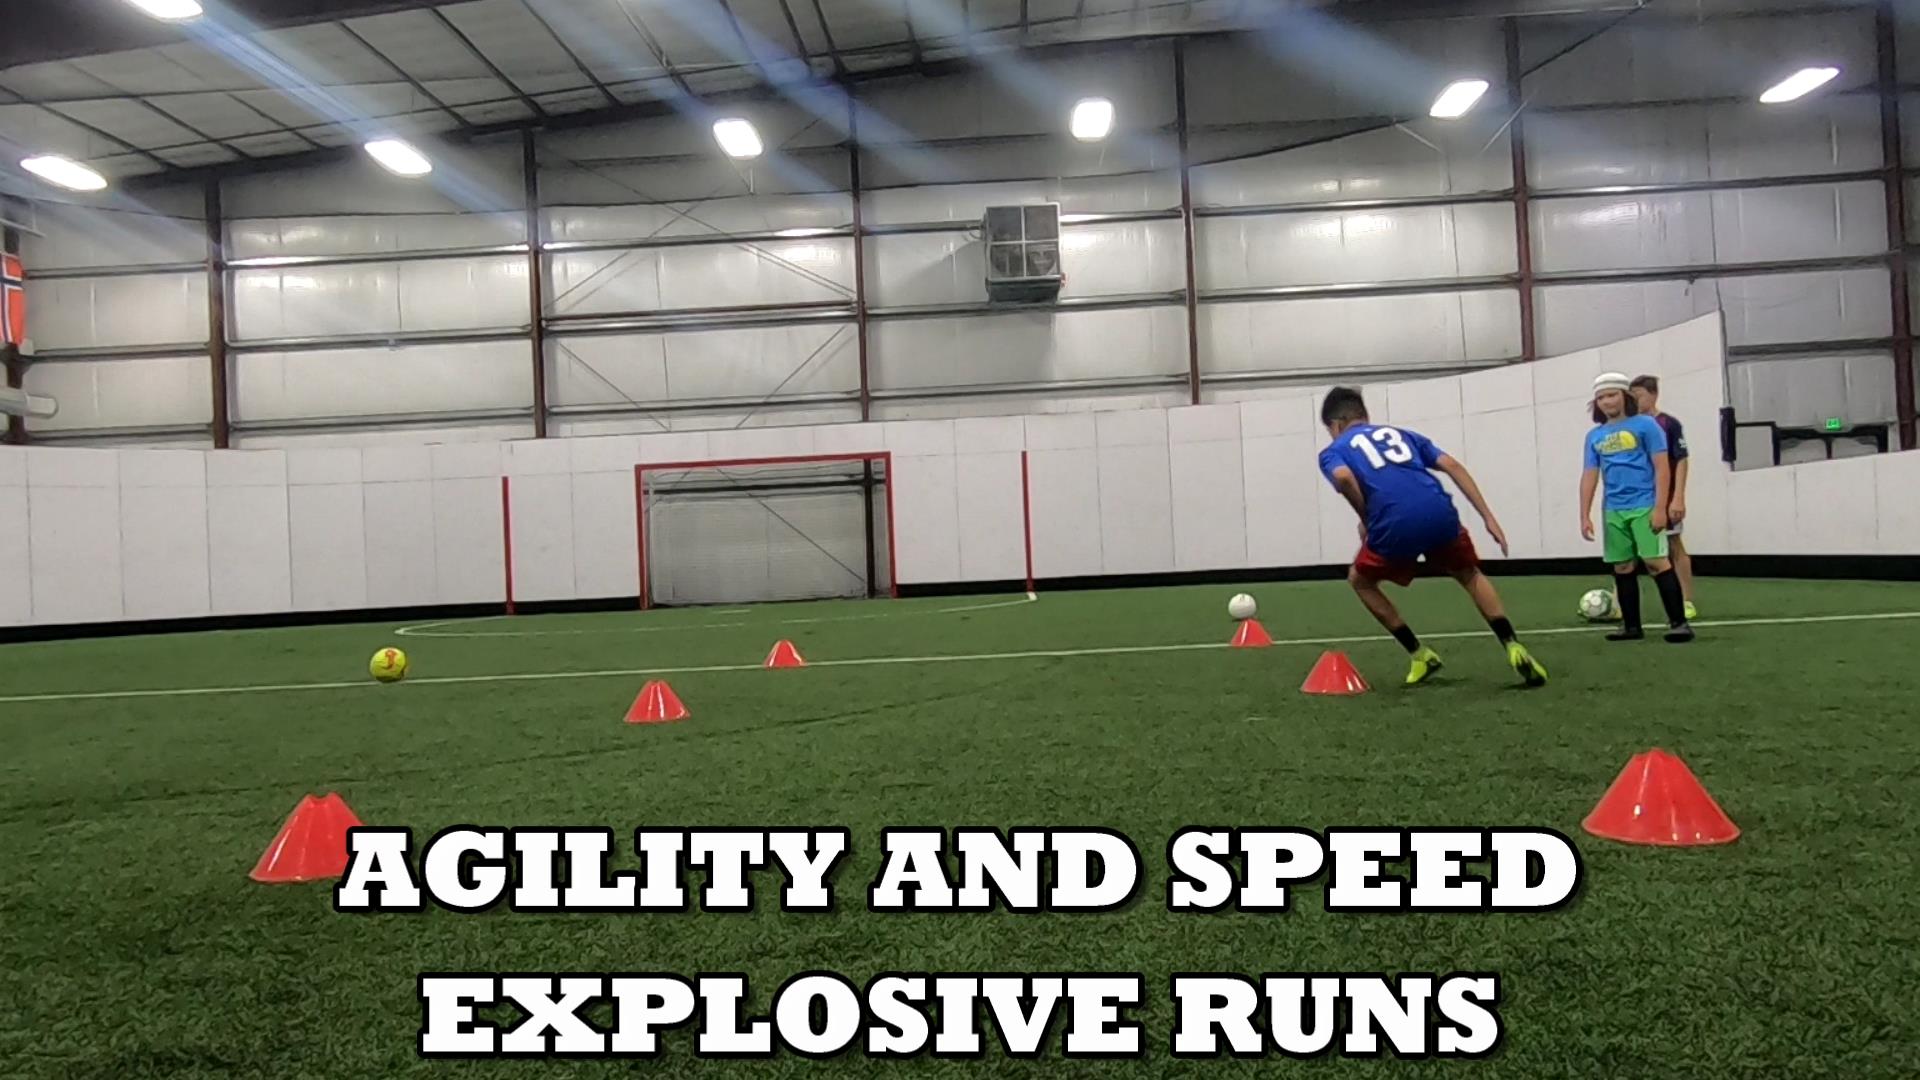 Soccer Drills to Improve Ball Control